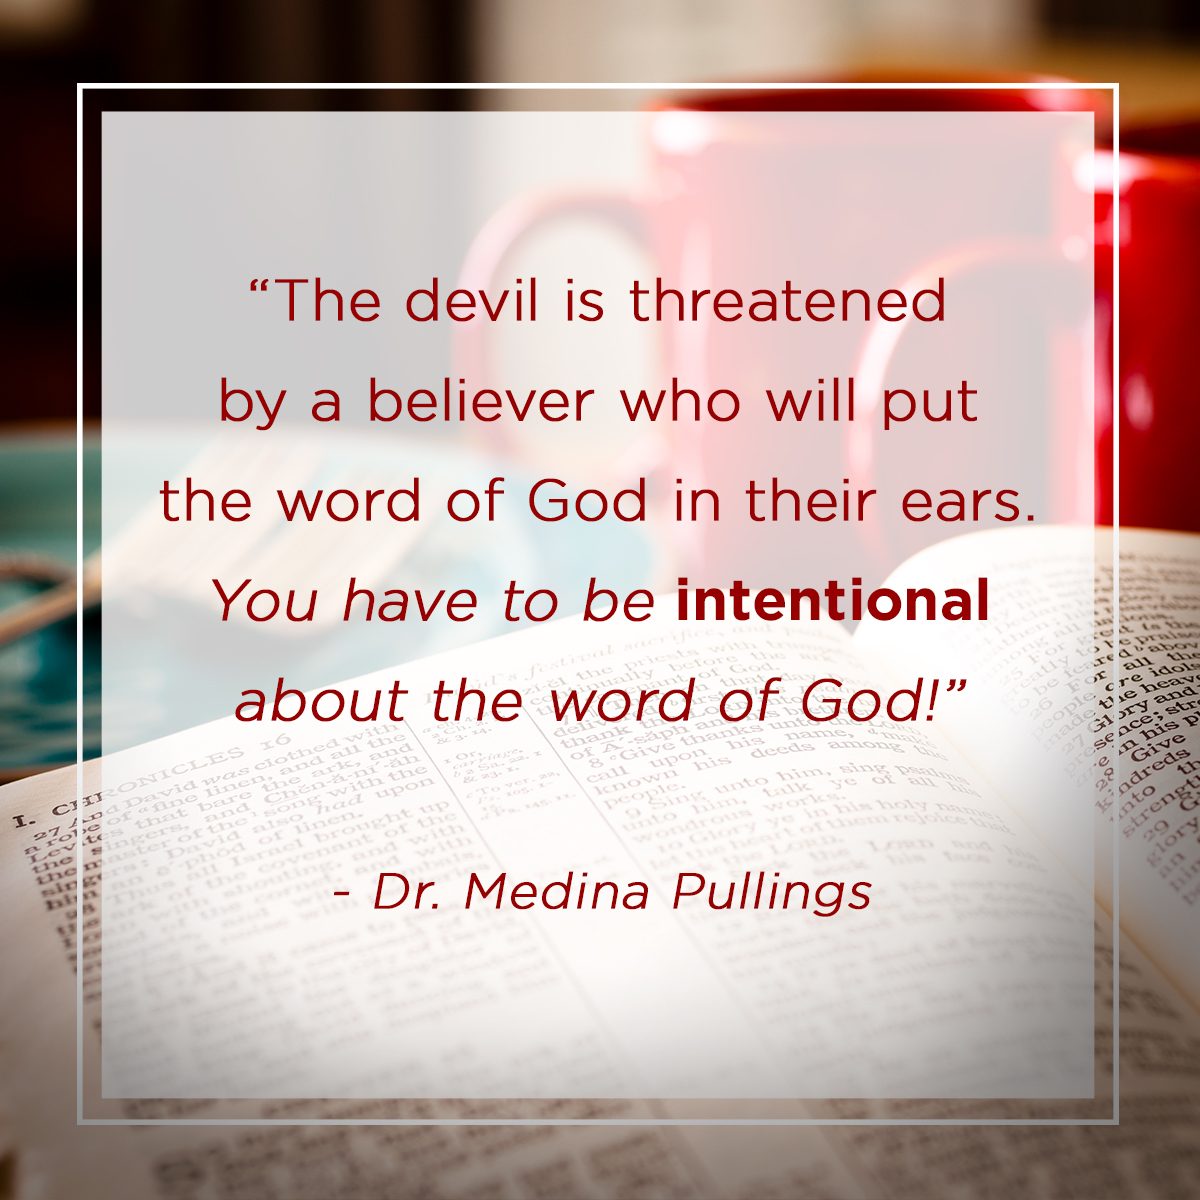 “The devil is threatened by a believer who will put the word of God in their ears. You have to be intentional about the word of God!” – Dr. Medina Pullings